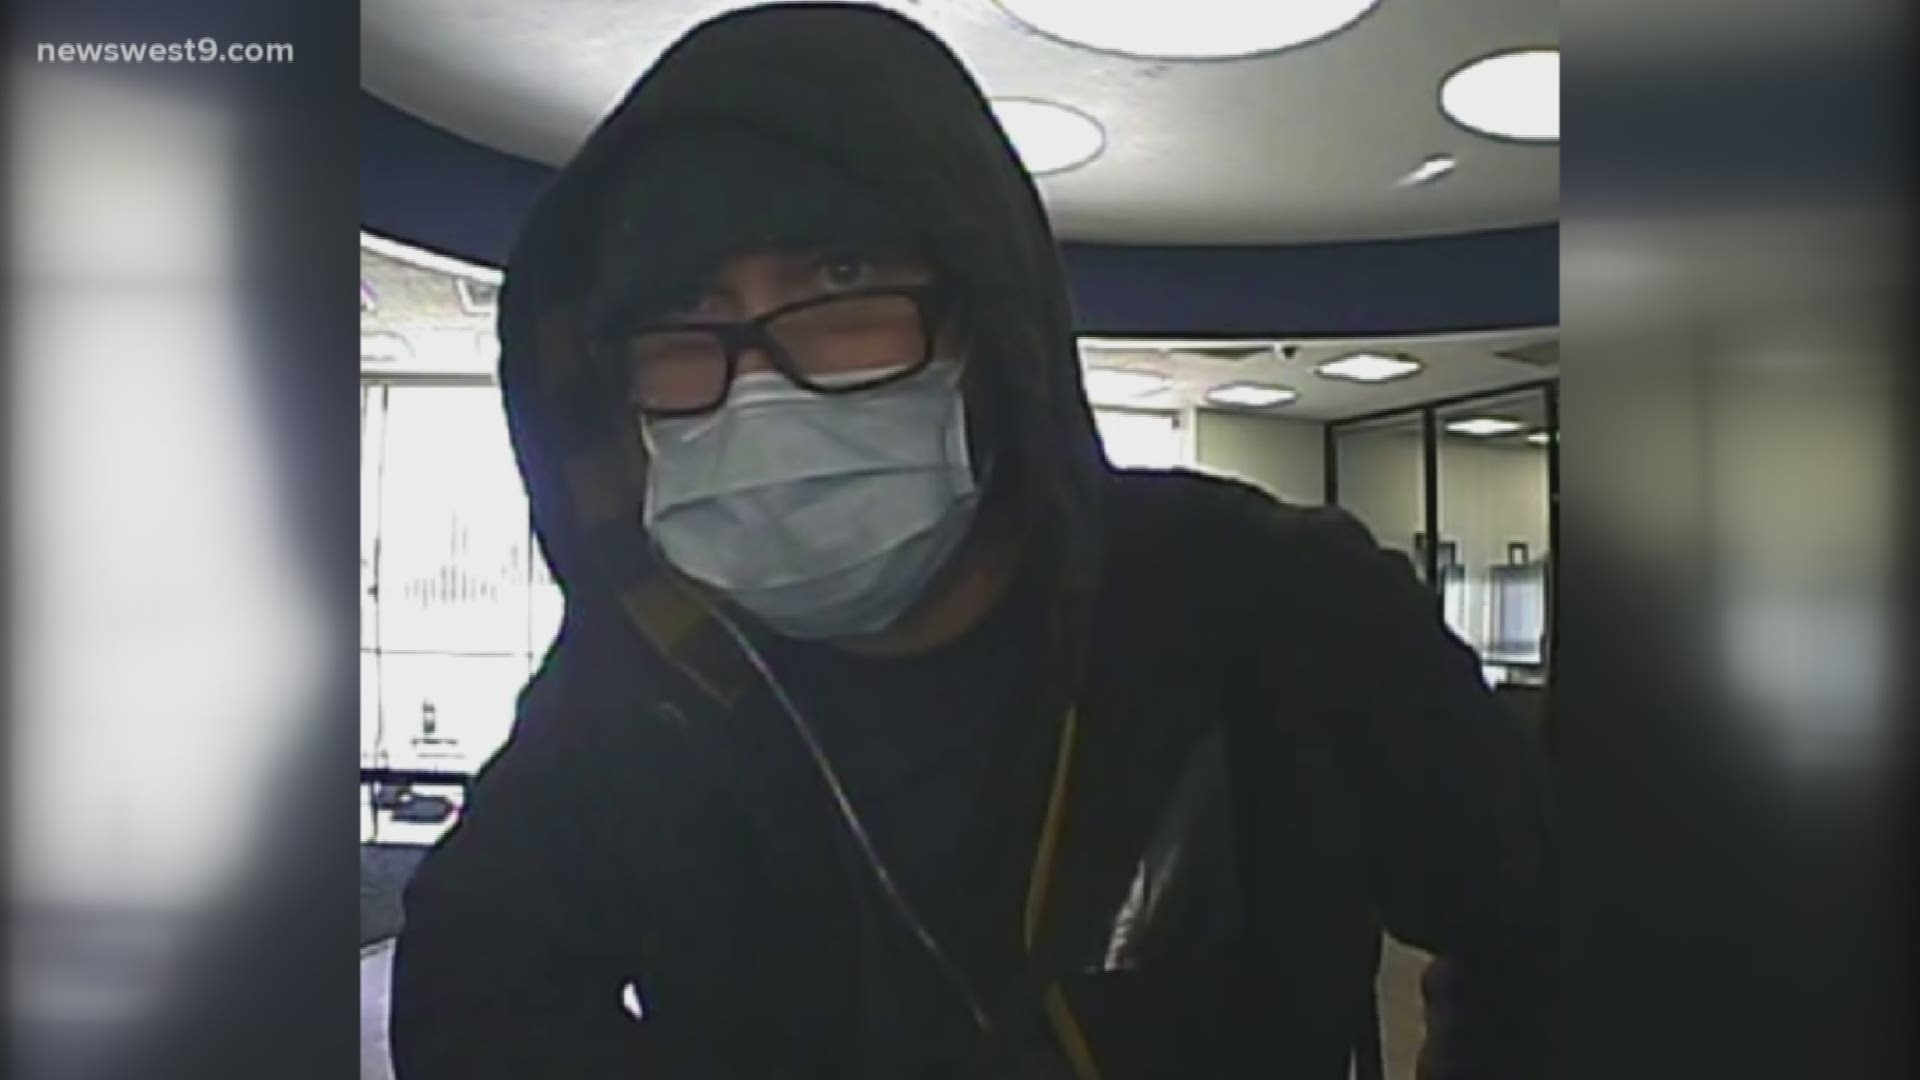 The suspect is reportedly a white male with glasses wearing a hoodie and a surgical mask.